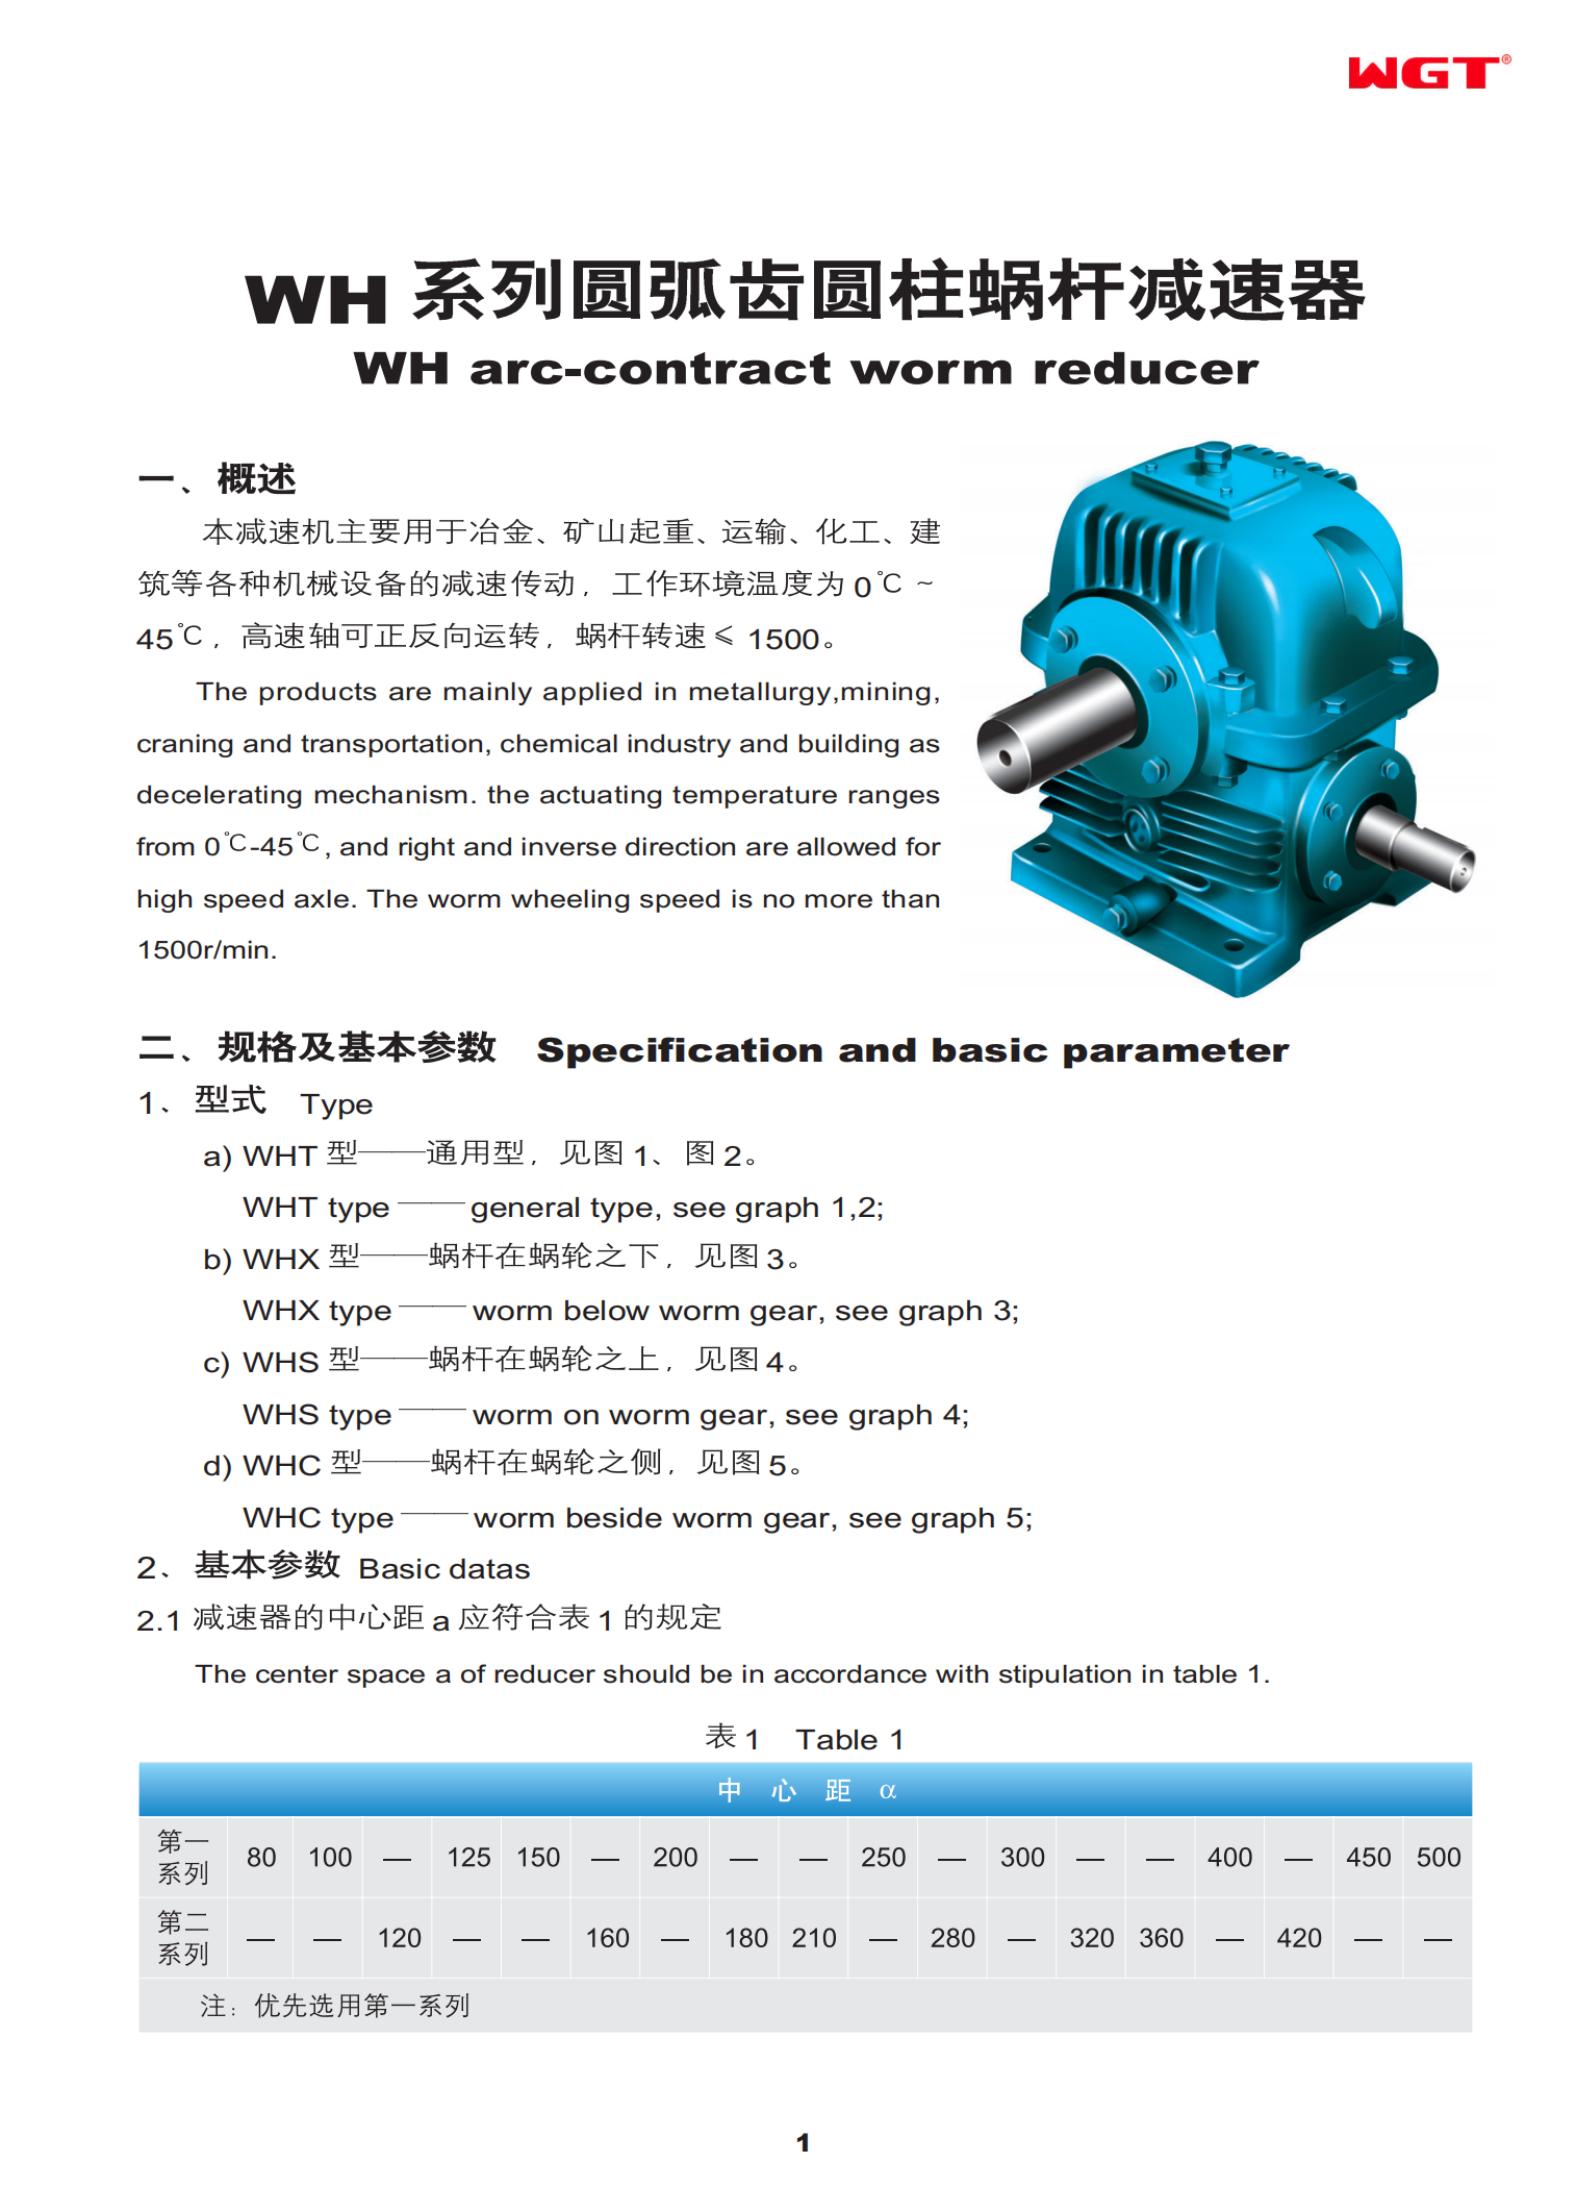 WHT10 WHarc-contract worm reducer